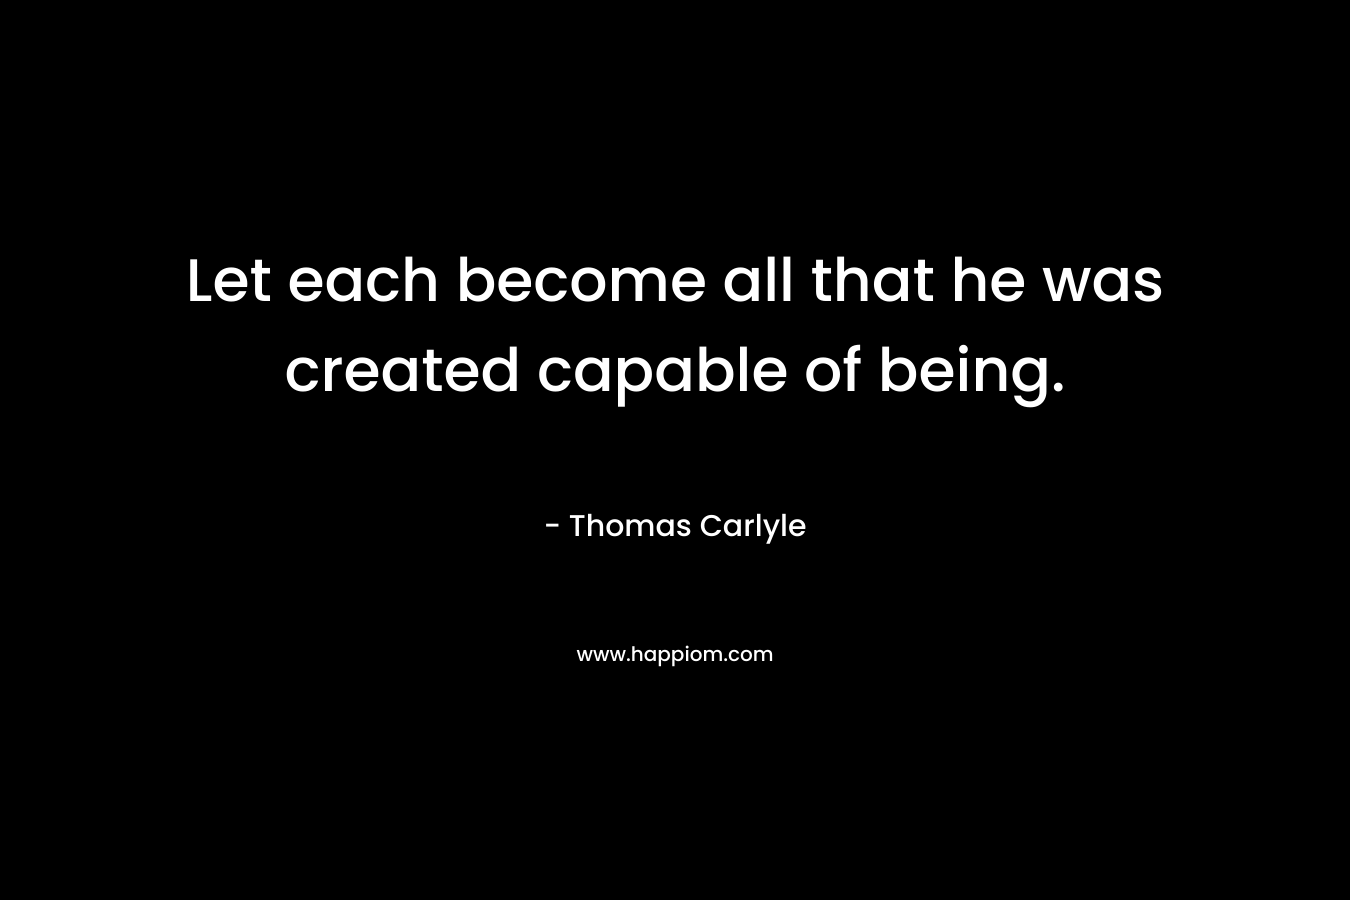 Let each become all that he was created capable of being. – Thomas Carlyle